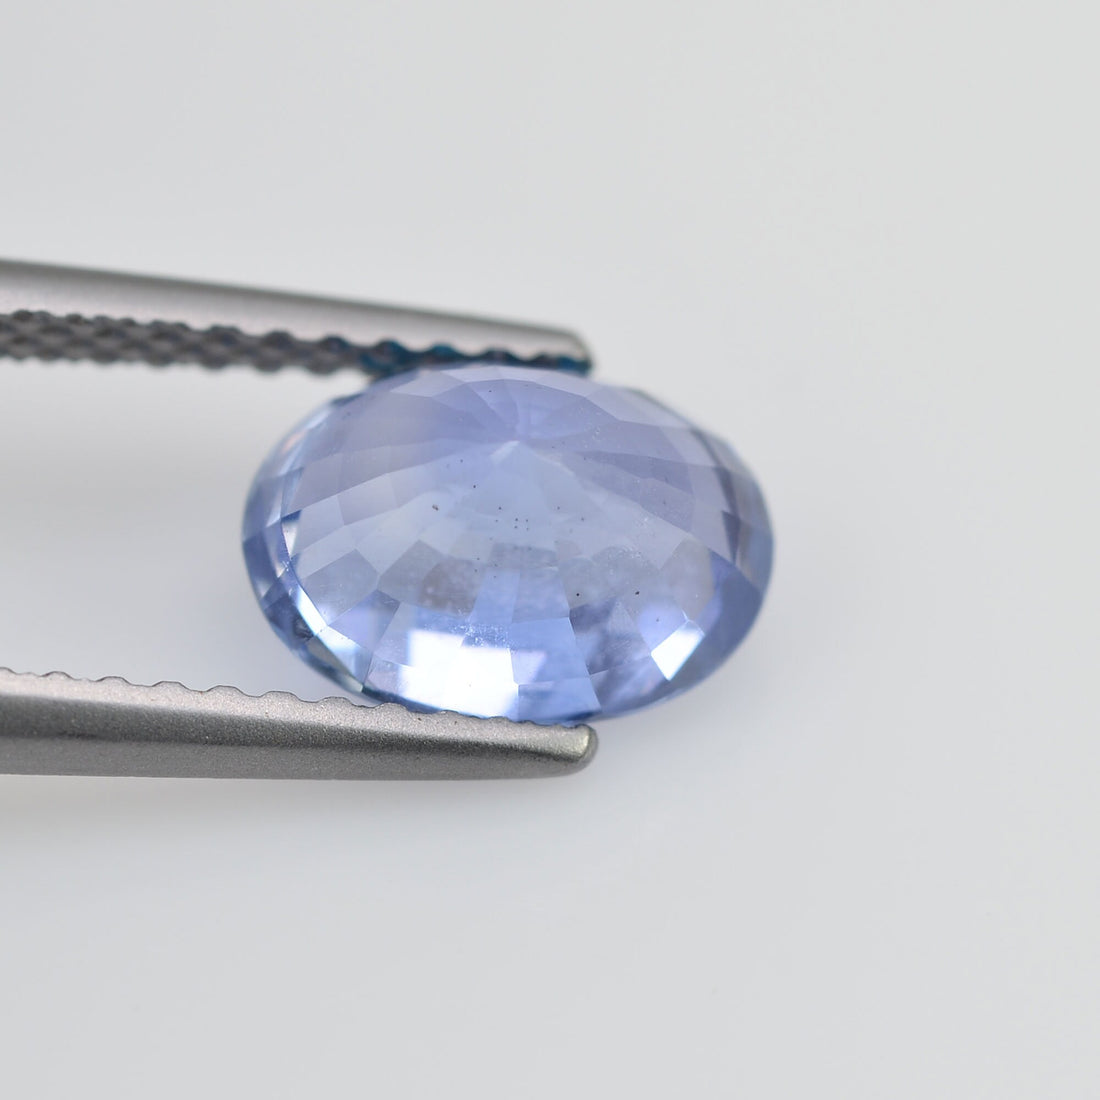 2.15 cts Unheated Natural Blue Sapphire Loose Gemstone Oval Cut Certified